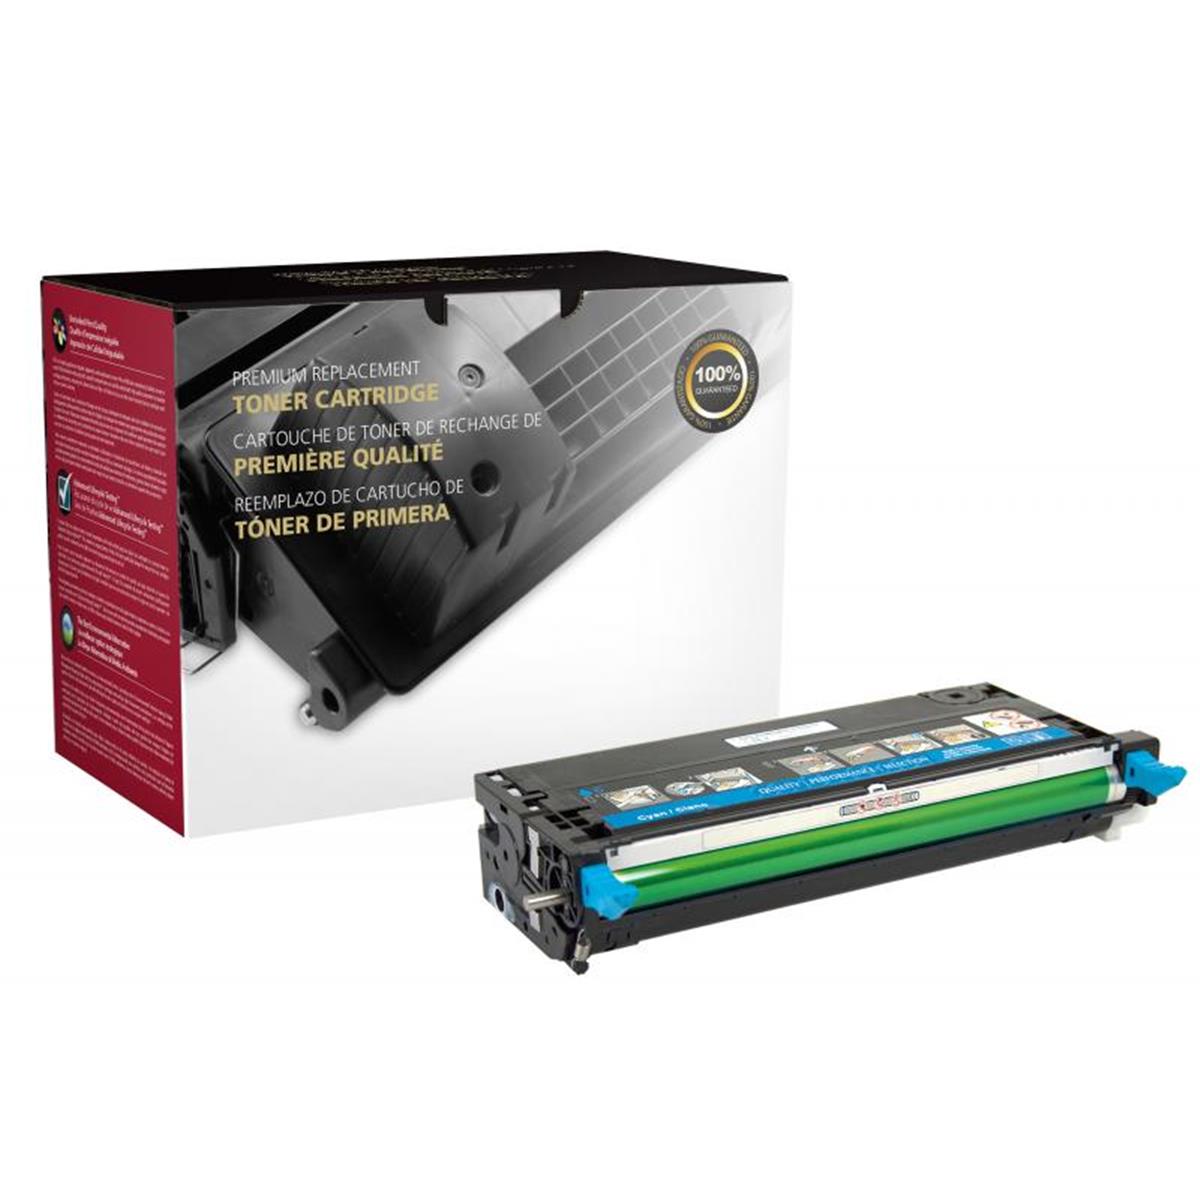 Picture of Dell 200116 High Yield Cyan Toner Cartridge for Dell 3110 & 3115